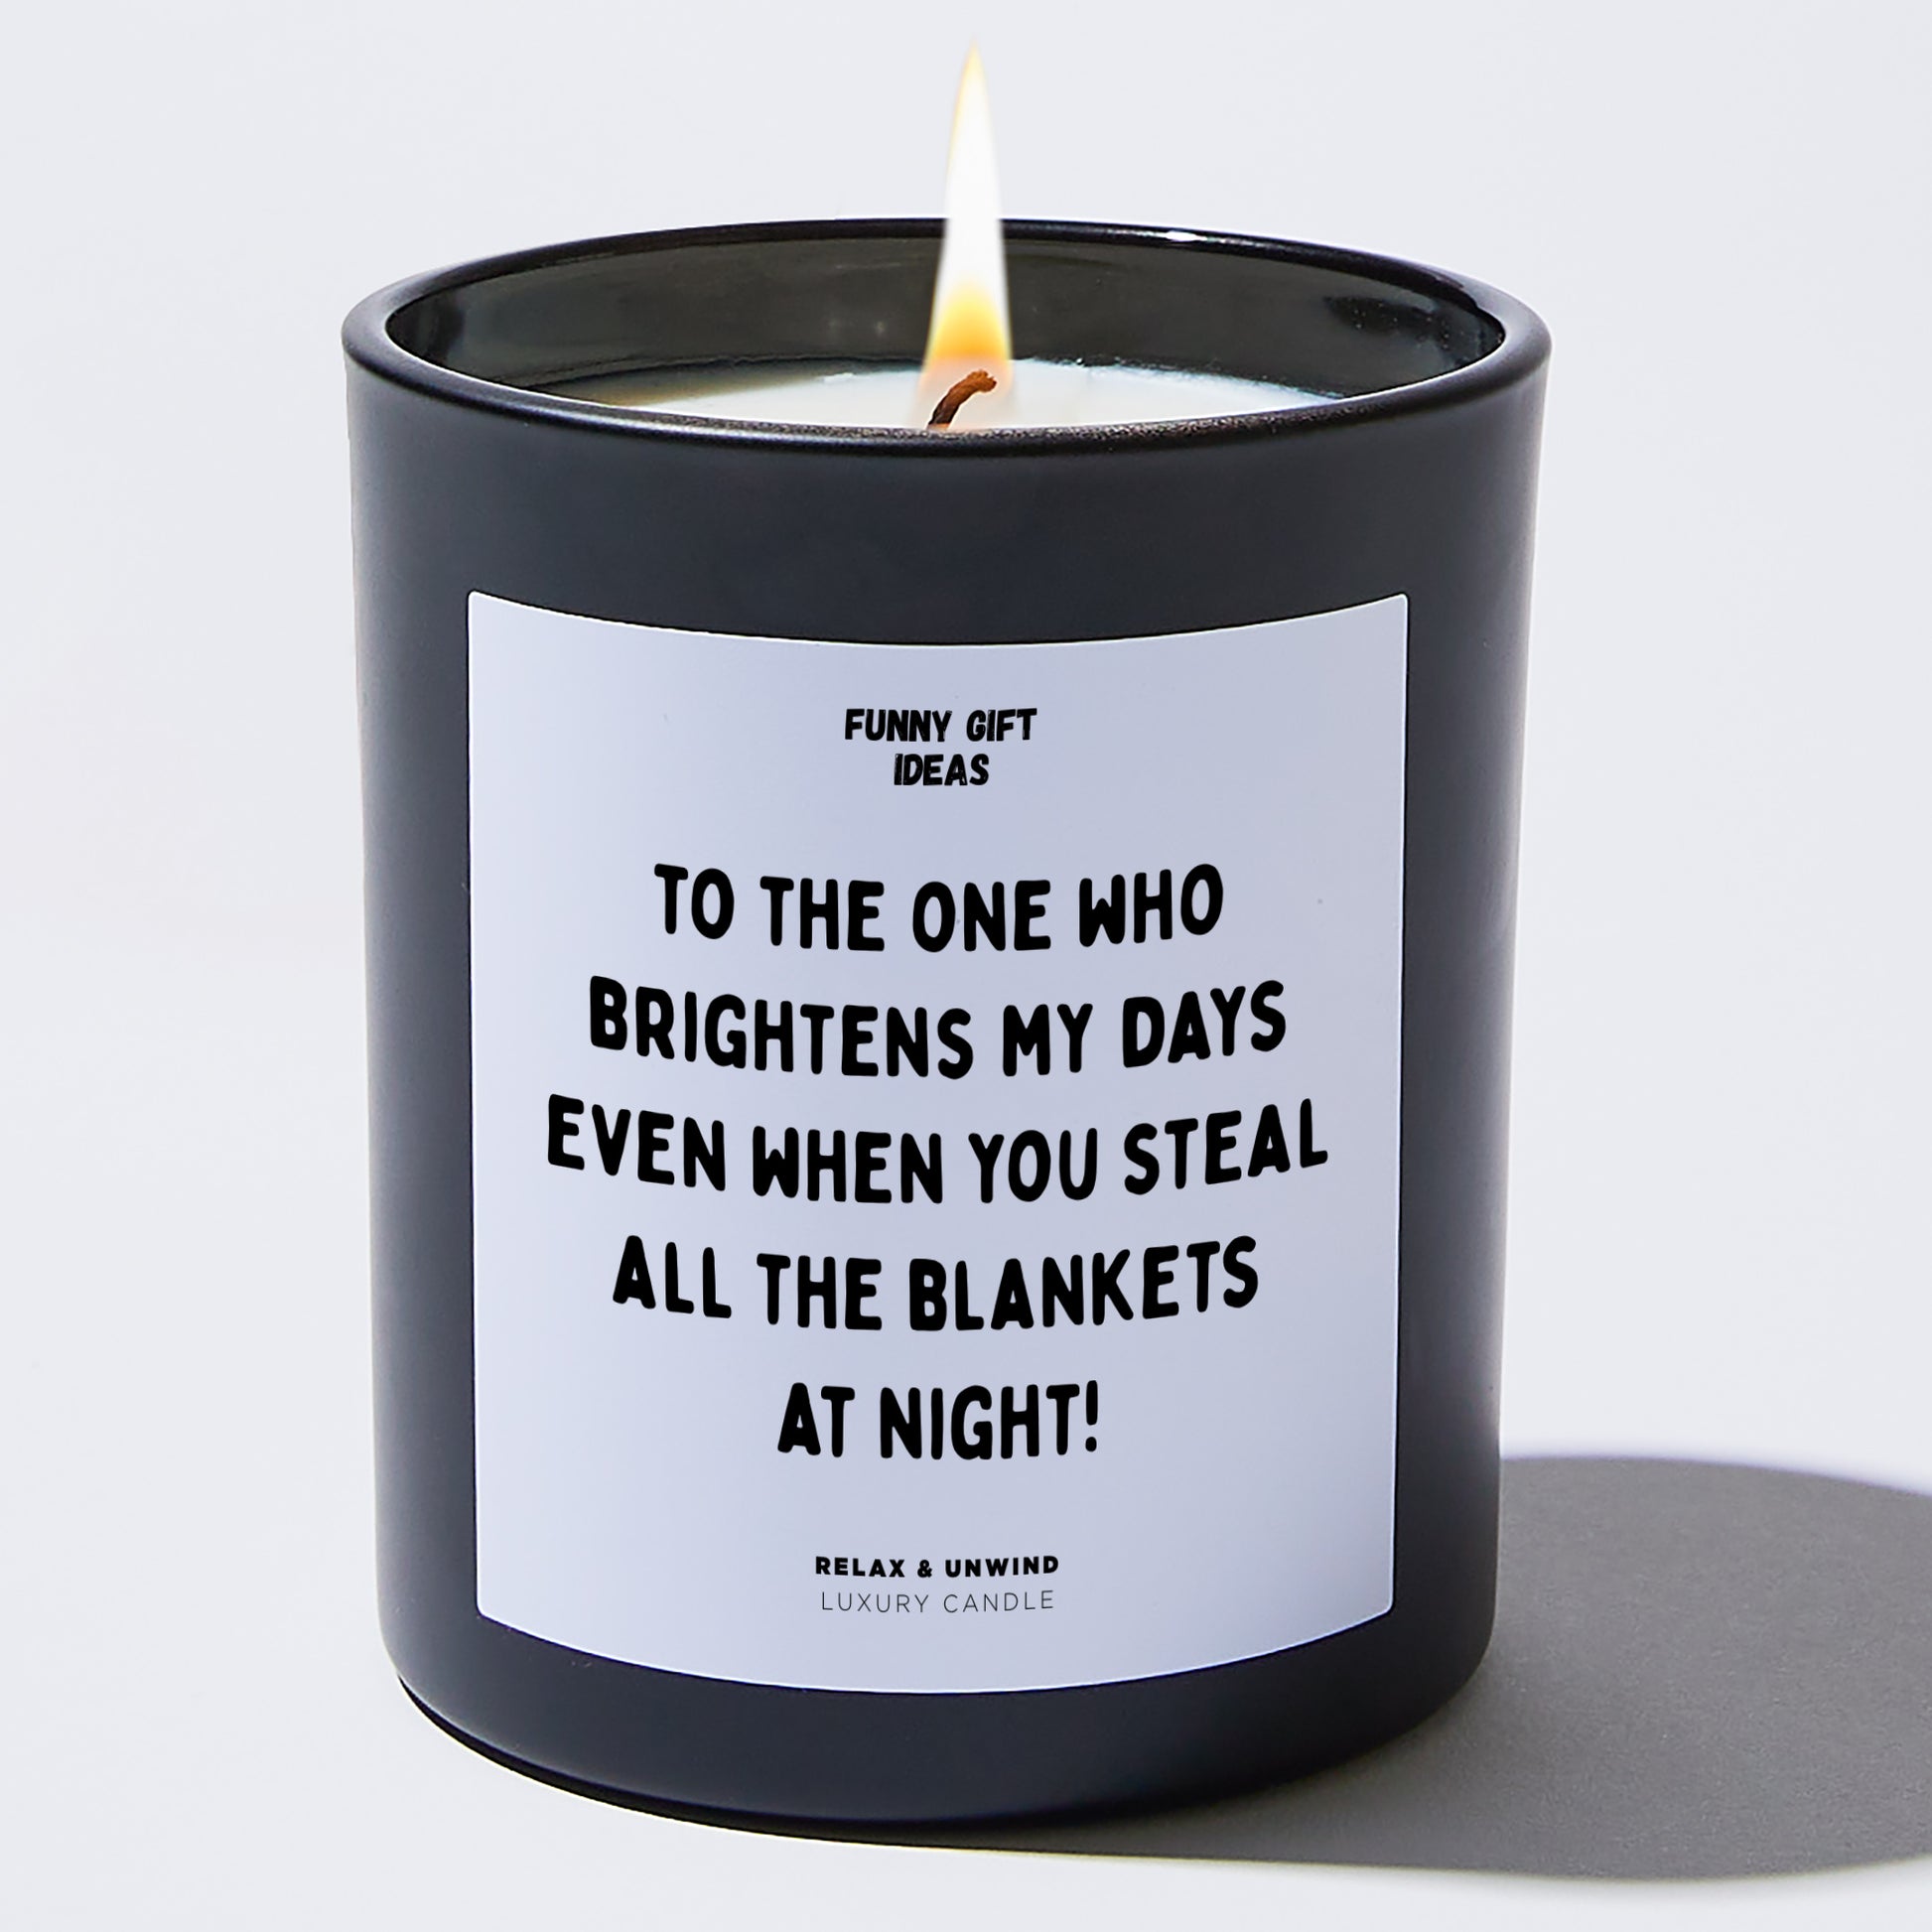 Anniversary To the One Who Brightens My Days, Even When You Steal All the Blankets at Night! - Funny Gift Ideas